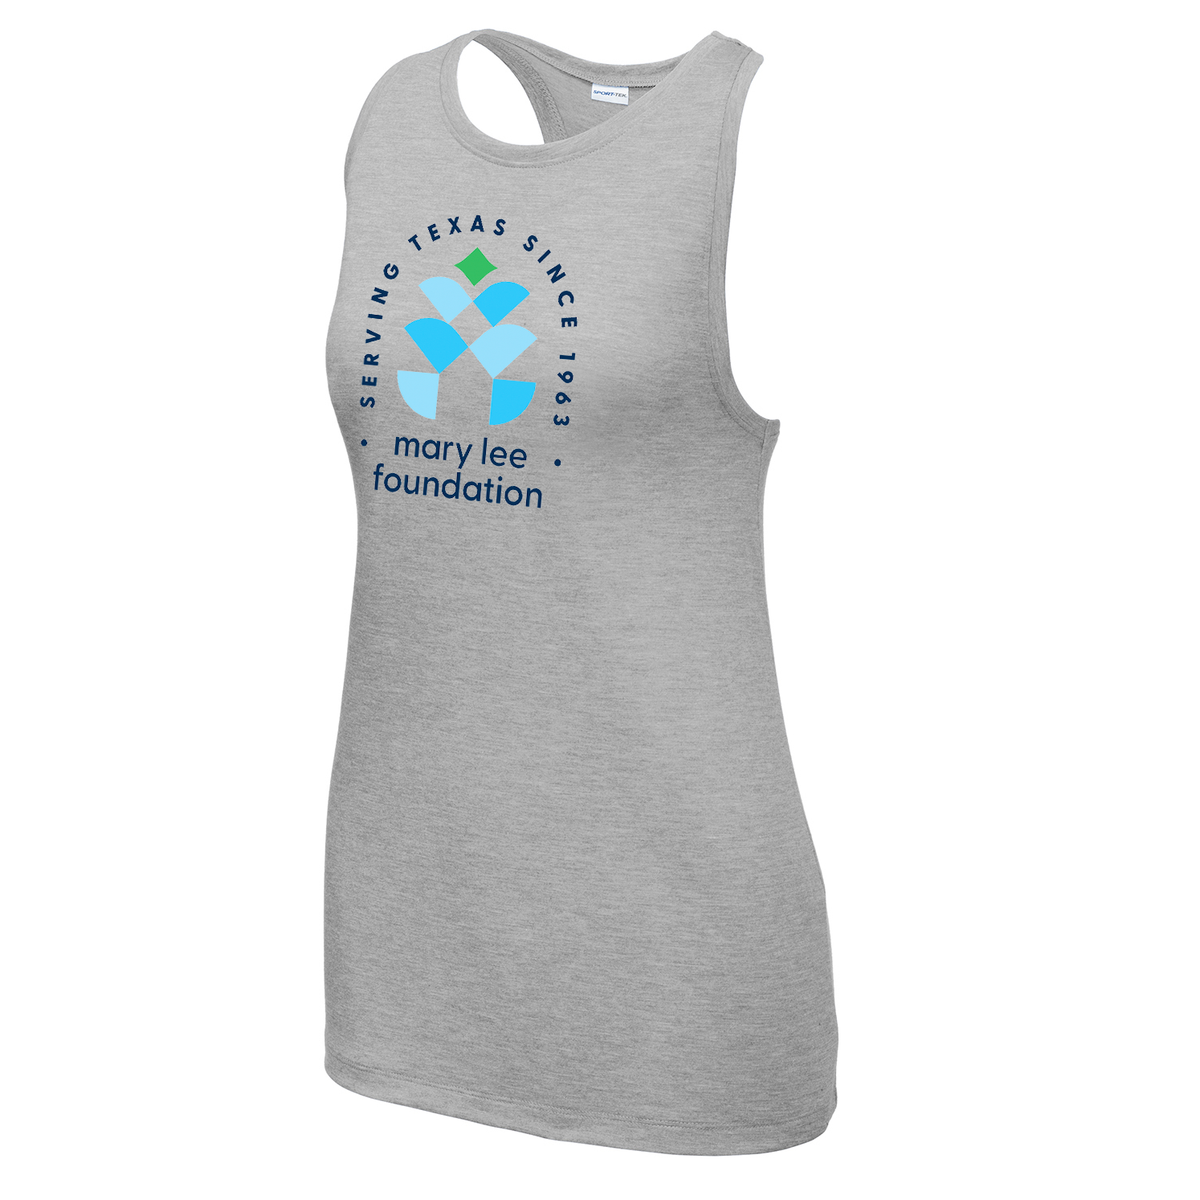 Mary Lee Foundation Women's Tri-Blend Wicking Racerback